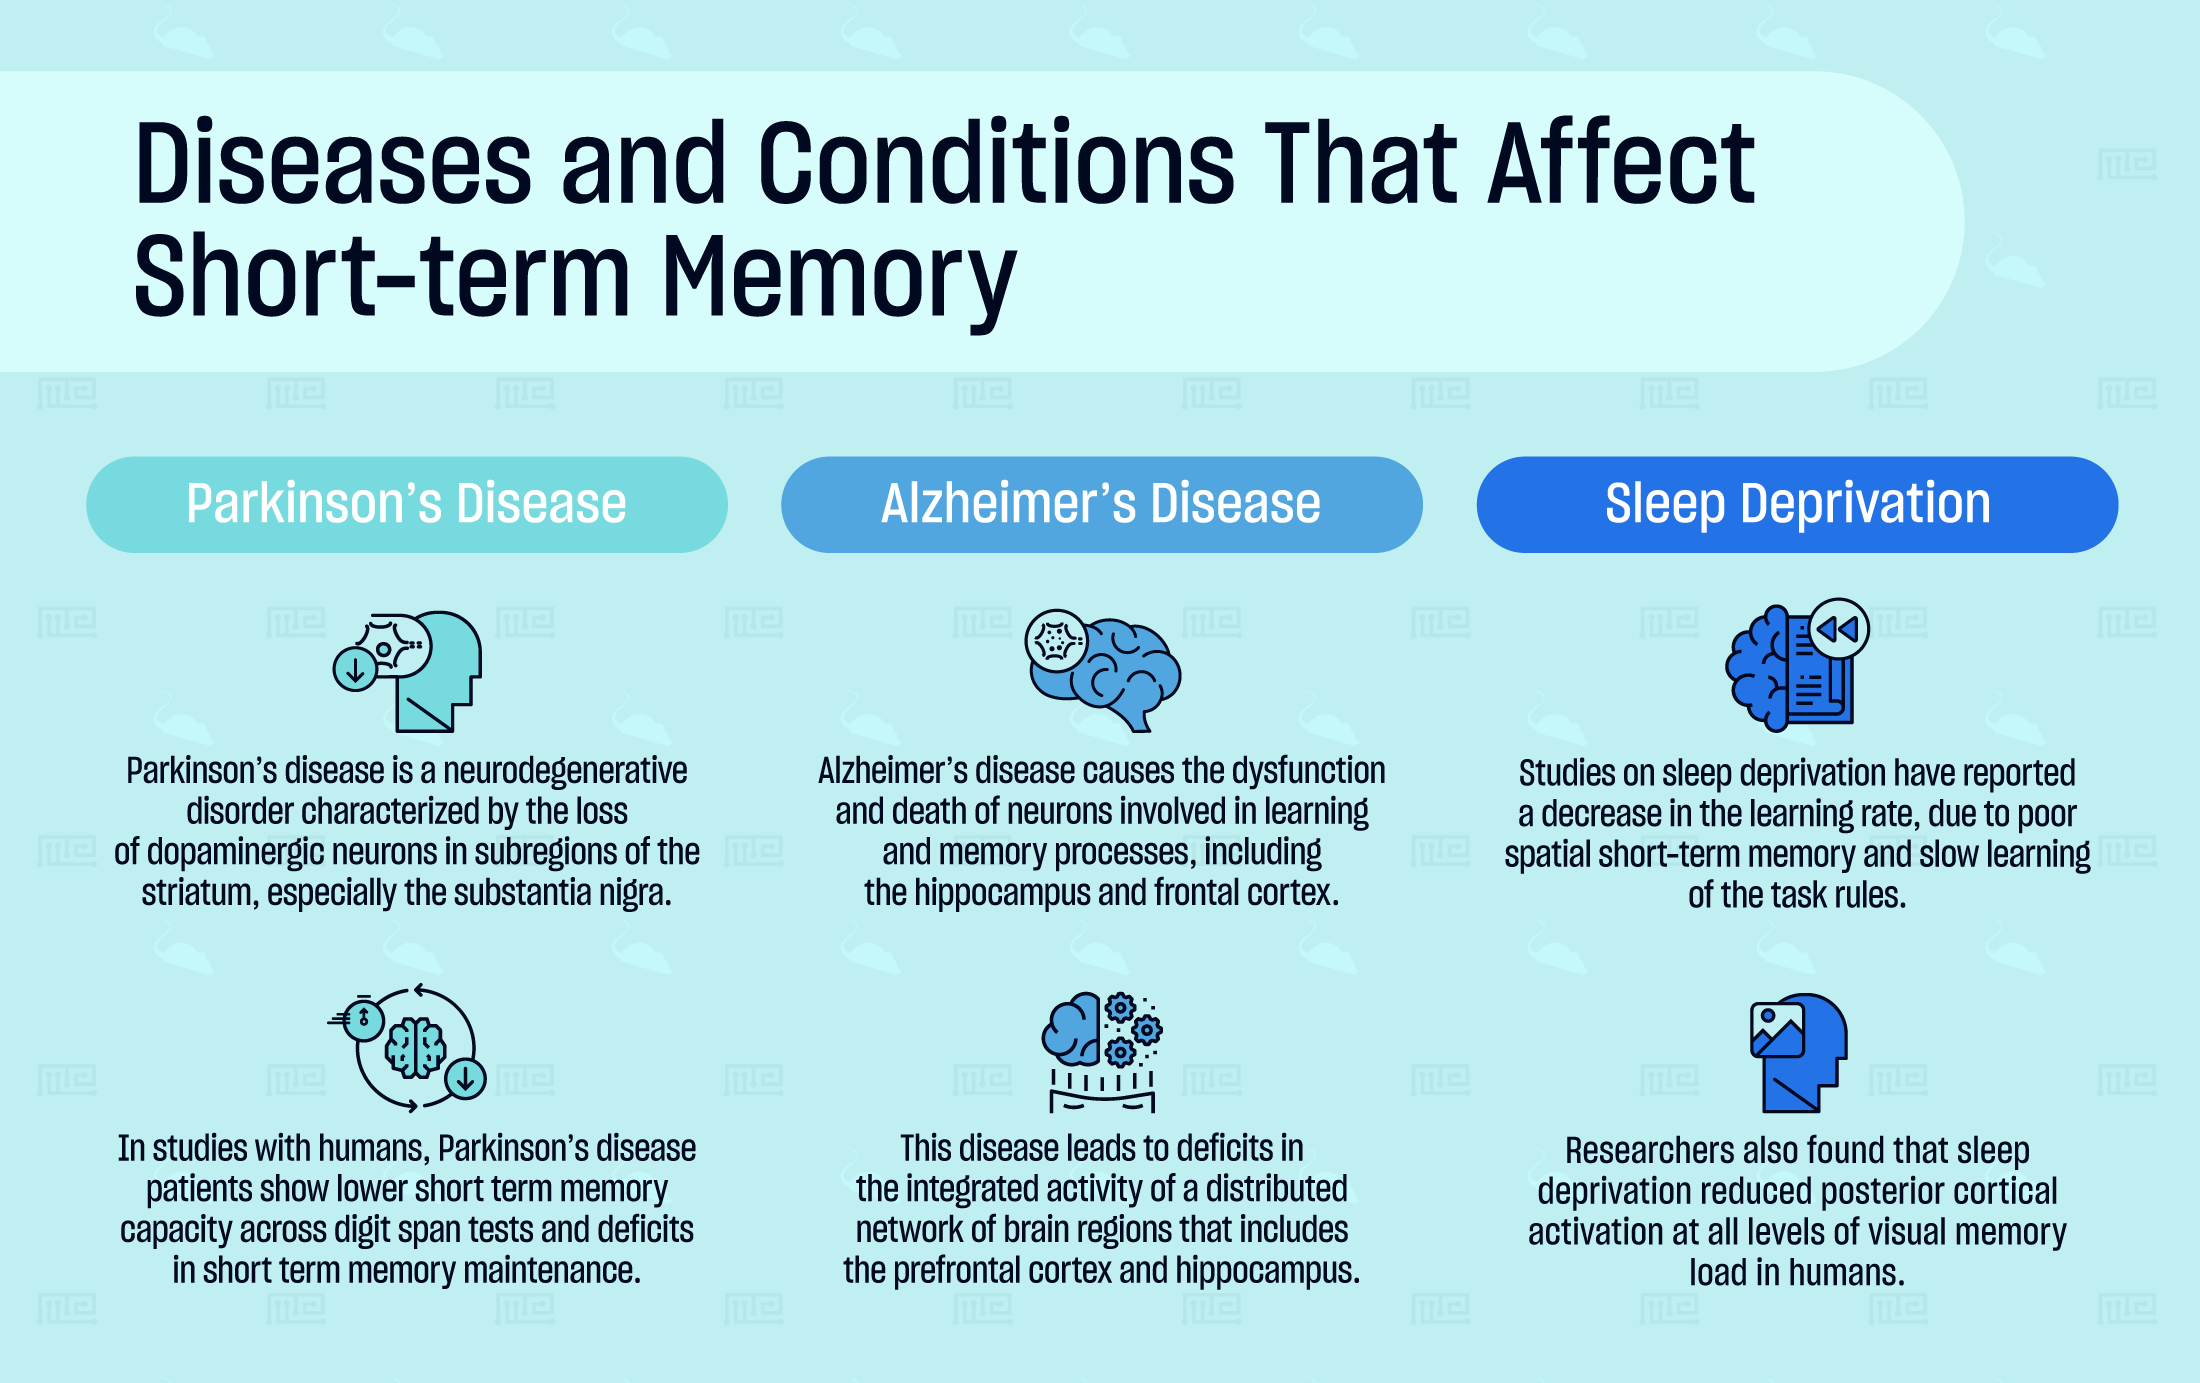 Electricity Can Improve Short-Term Memory in Older Adults